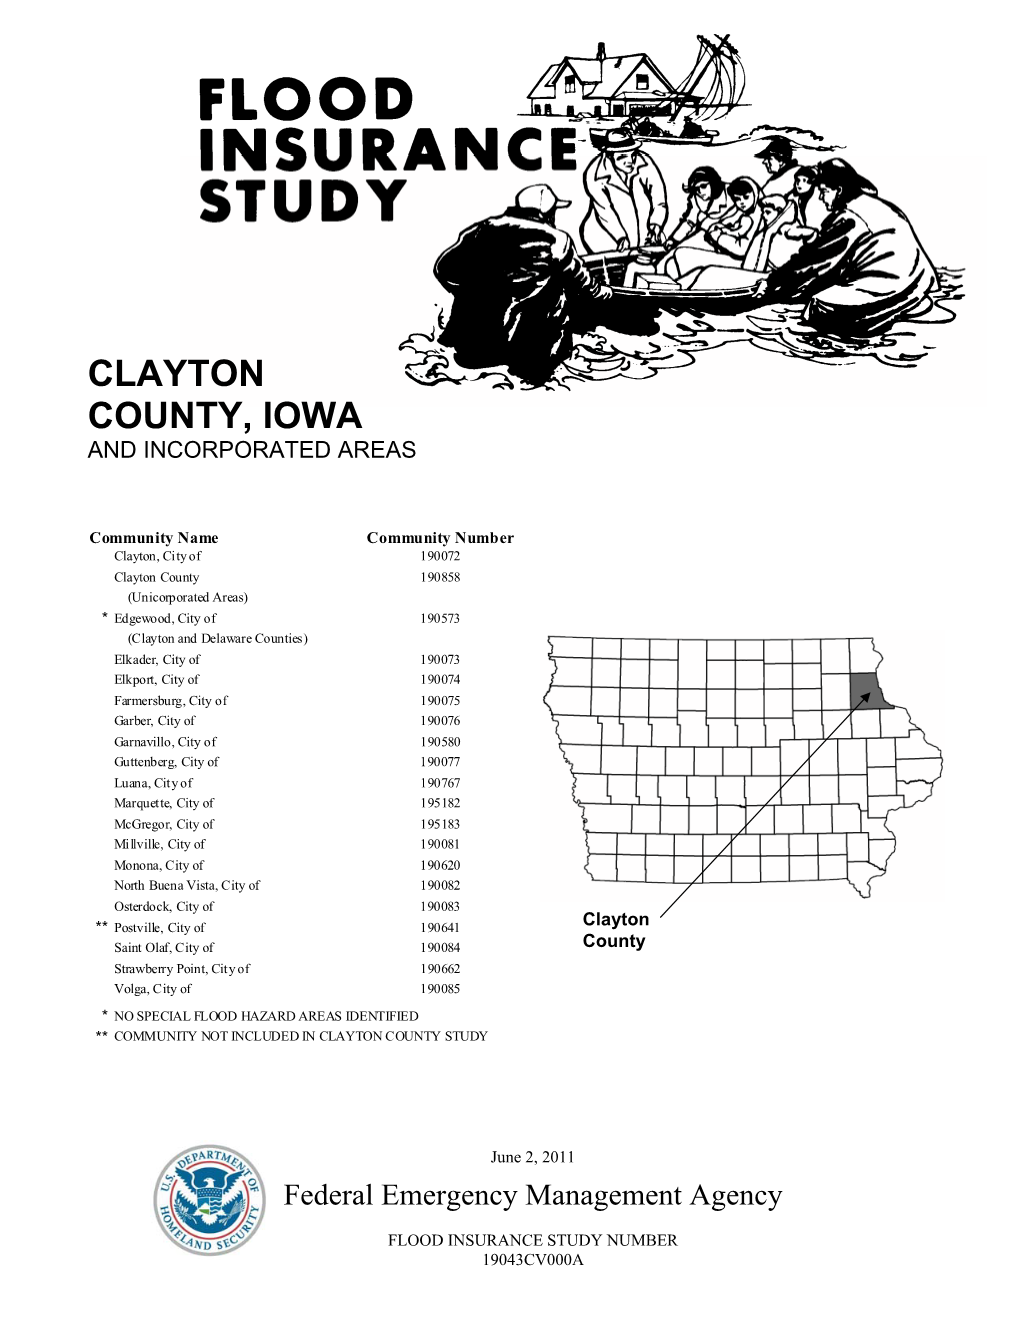 Clayton County, Iowa and Incorporated Areas